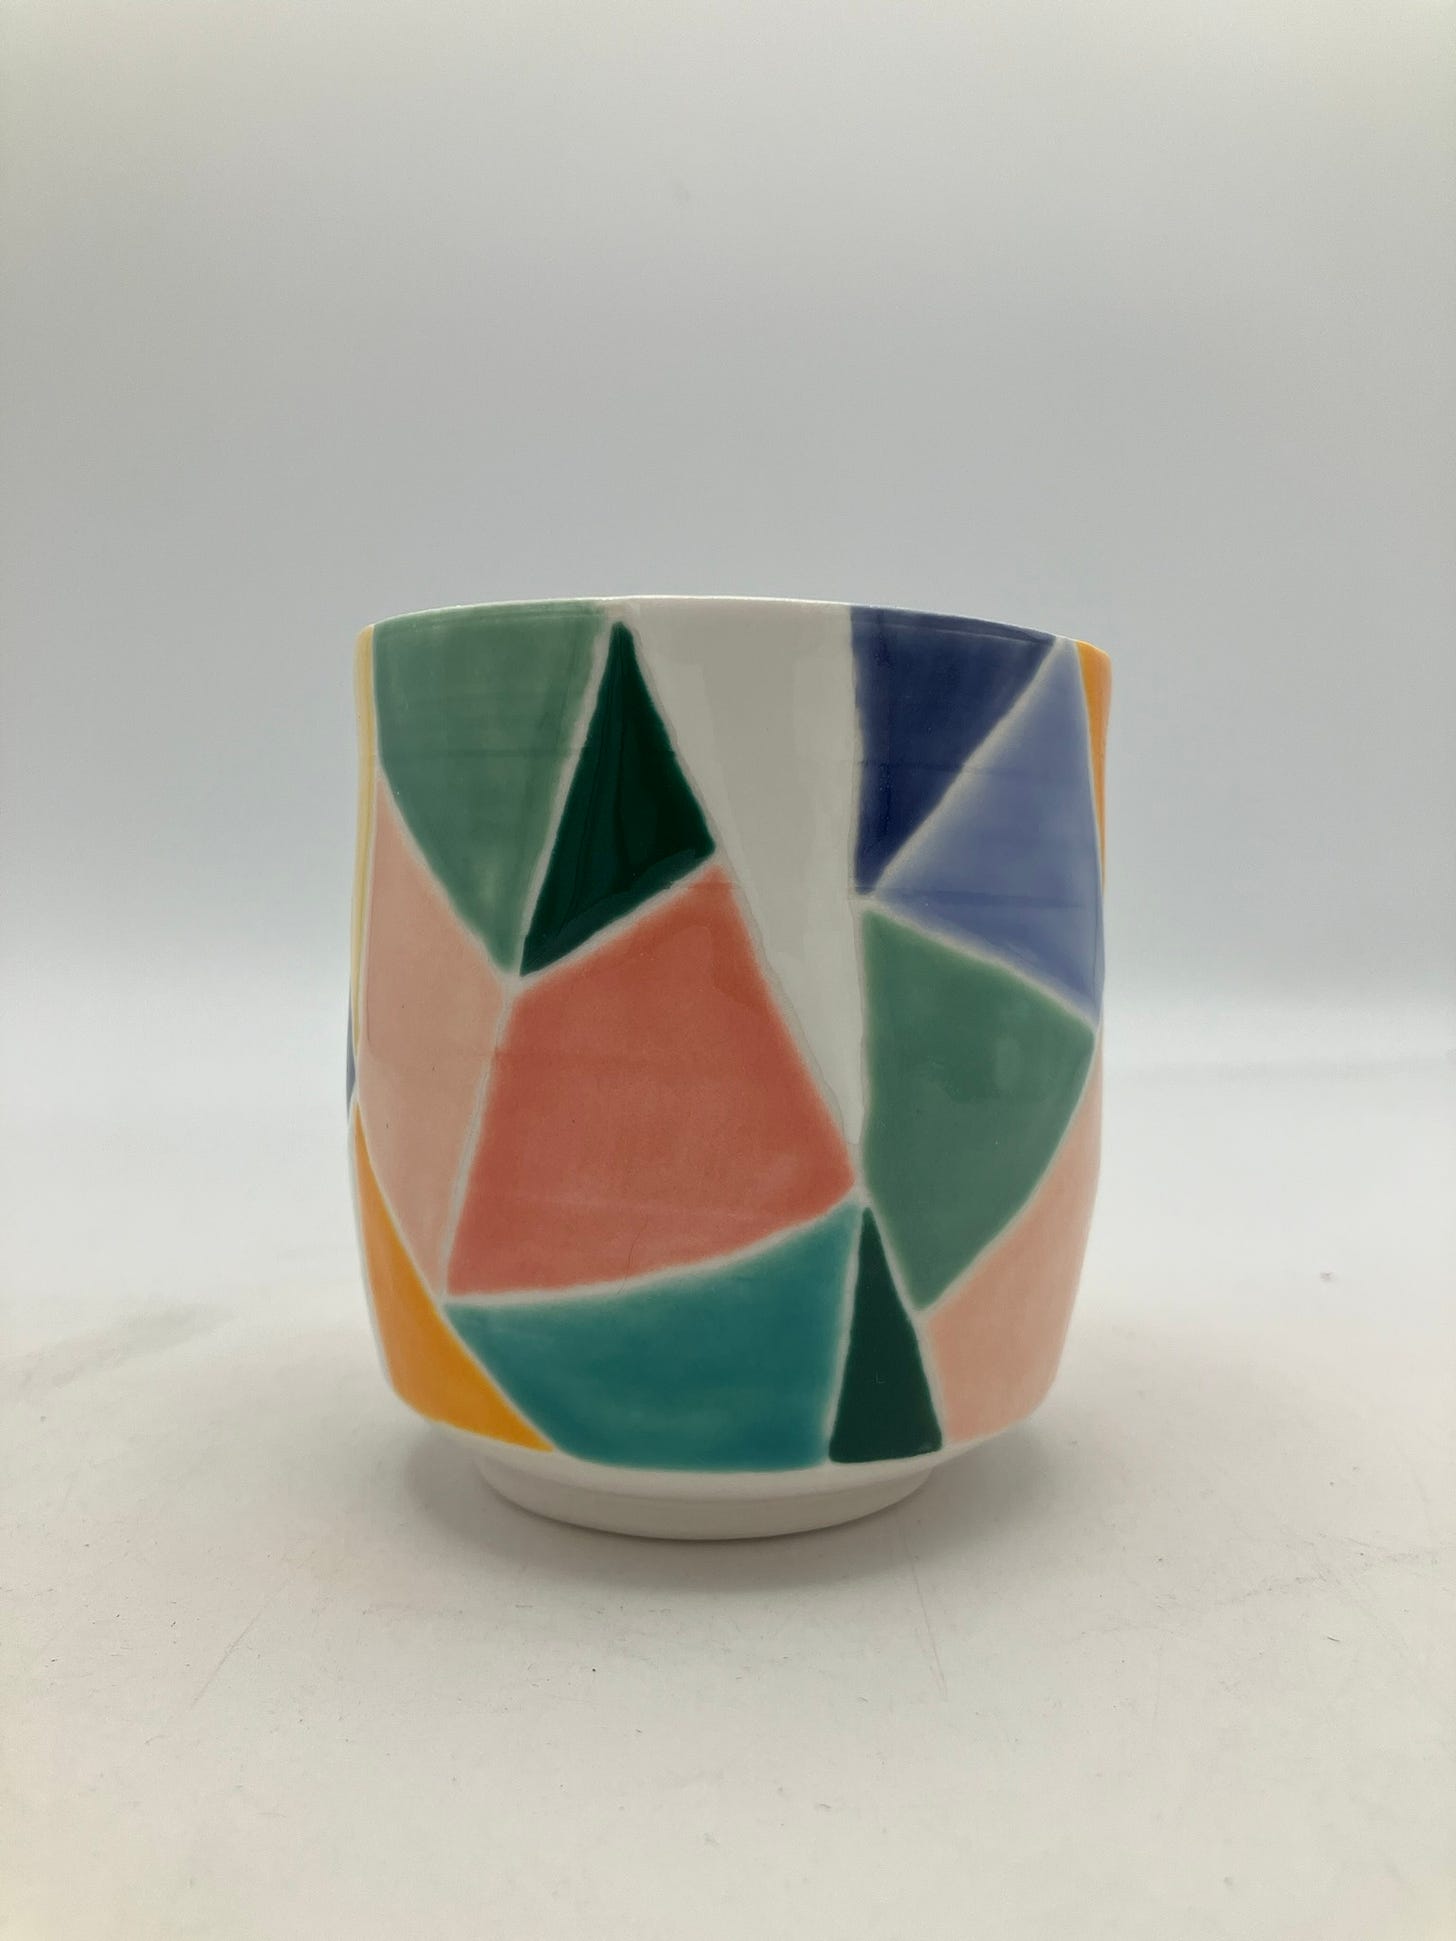 multicolored porcelain cup with teal and pink triangles